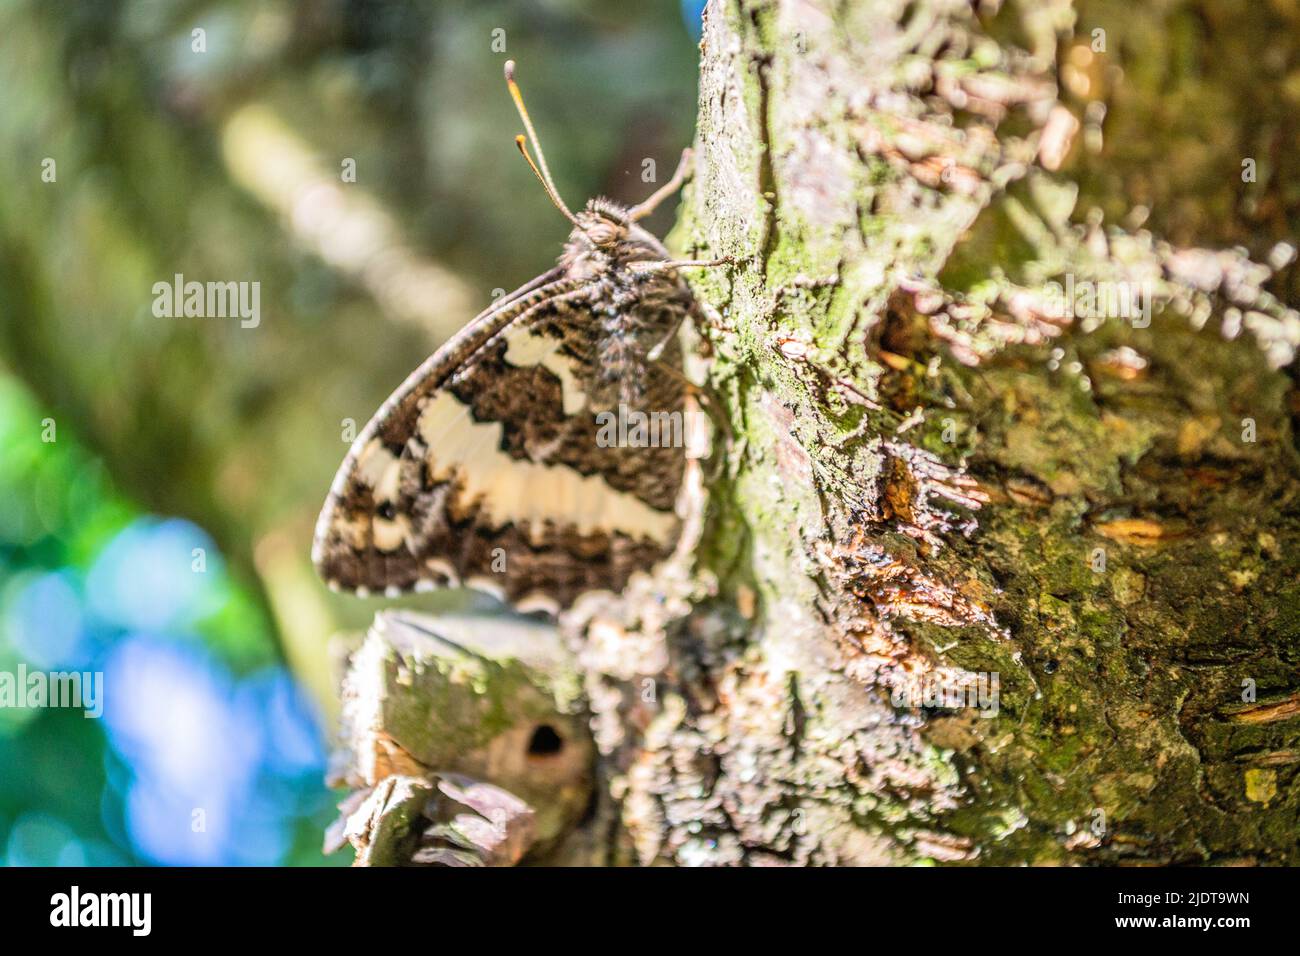 Black and white diurnal butterfly in its natural environment. Stock Photo